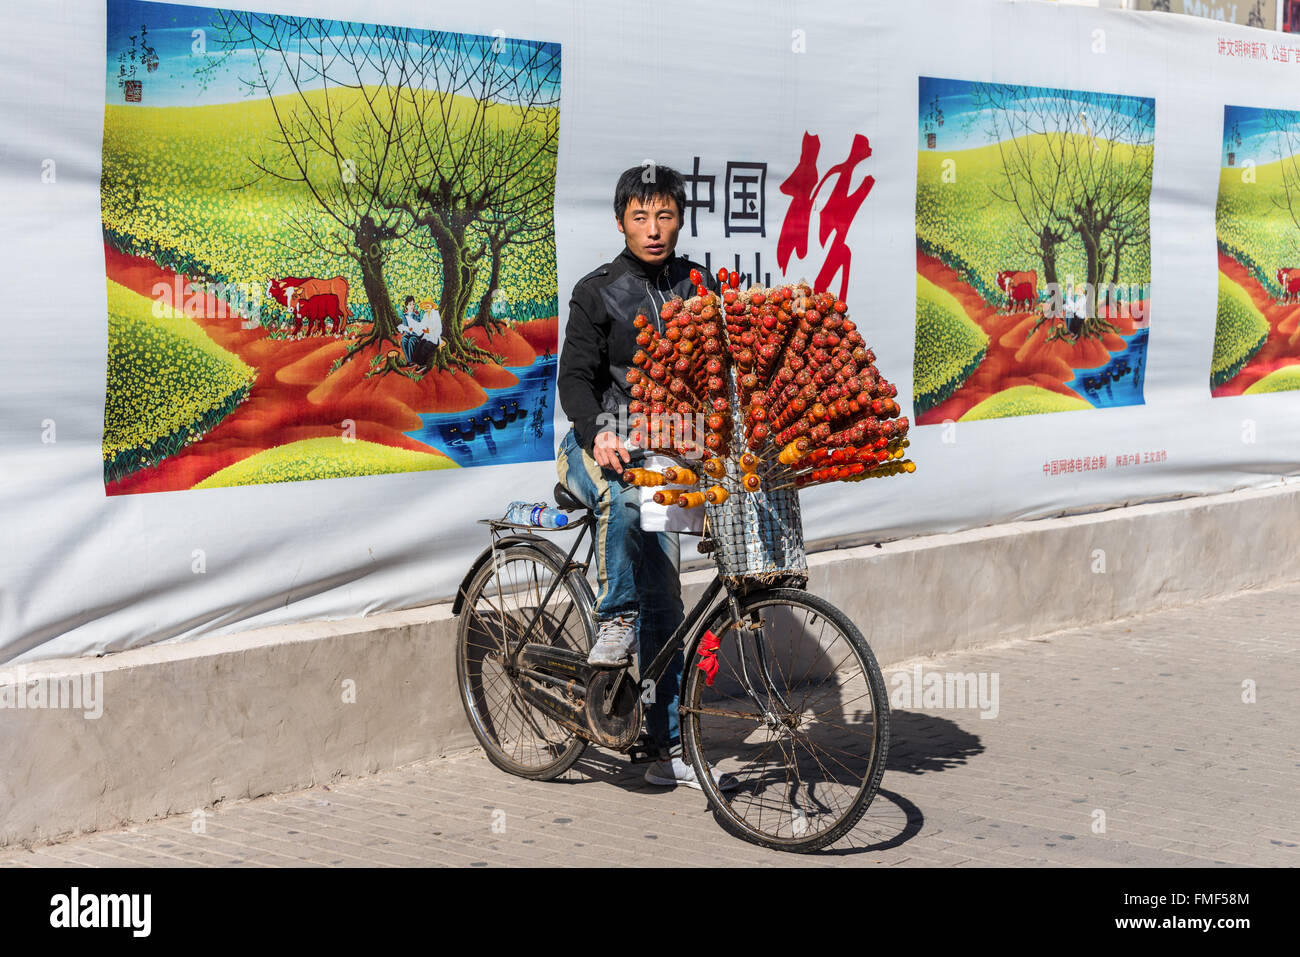 Chinese vendor on his bicycle selling candied fruits (Tanghulu) in Beijing, China. Stock Photo